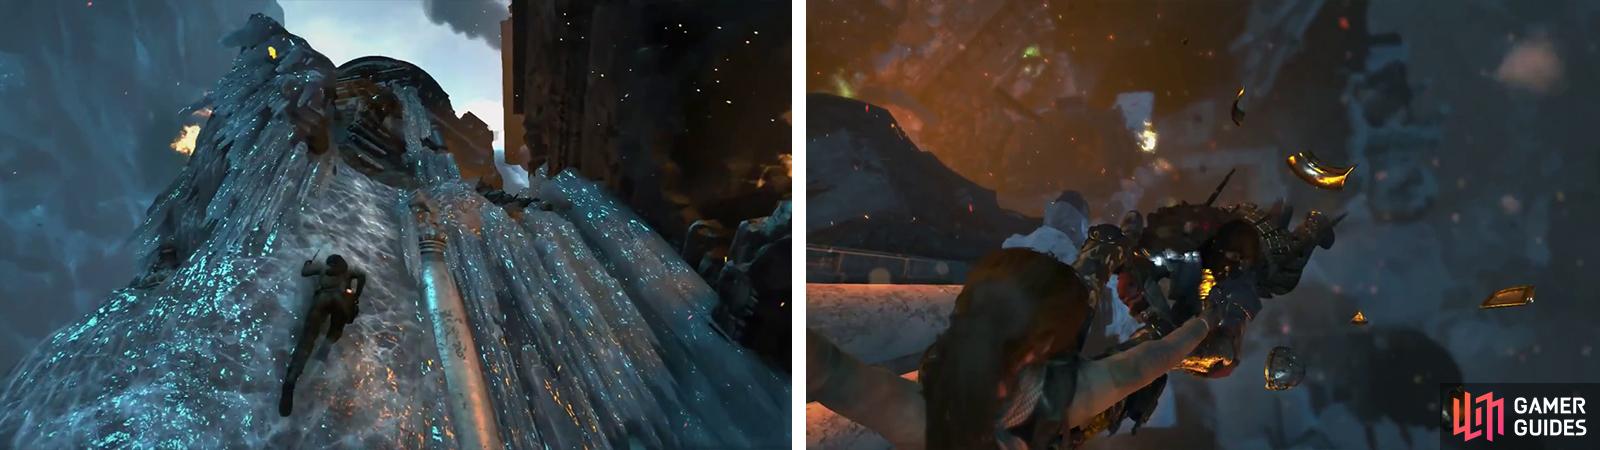 Climb to the very top of the area (left) and shoot the Deathless soldier during the scene to continue (right).